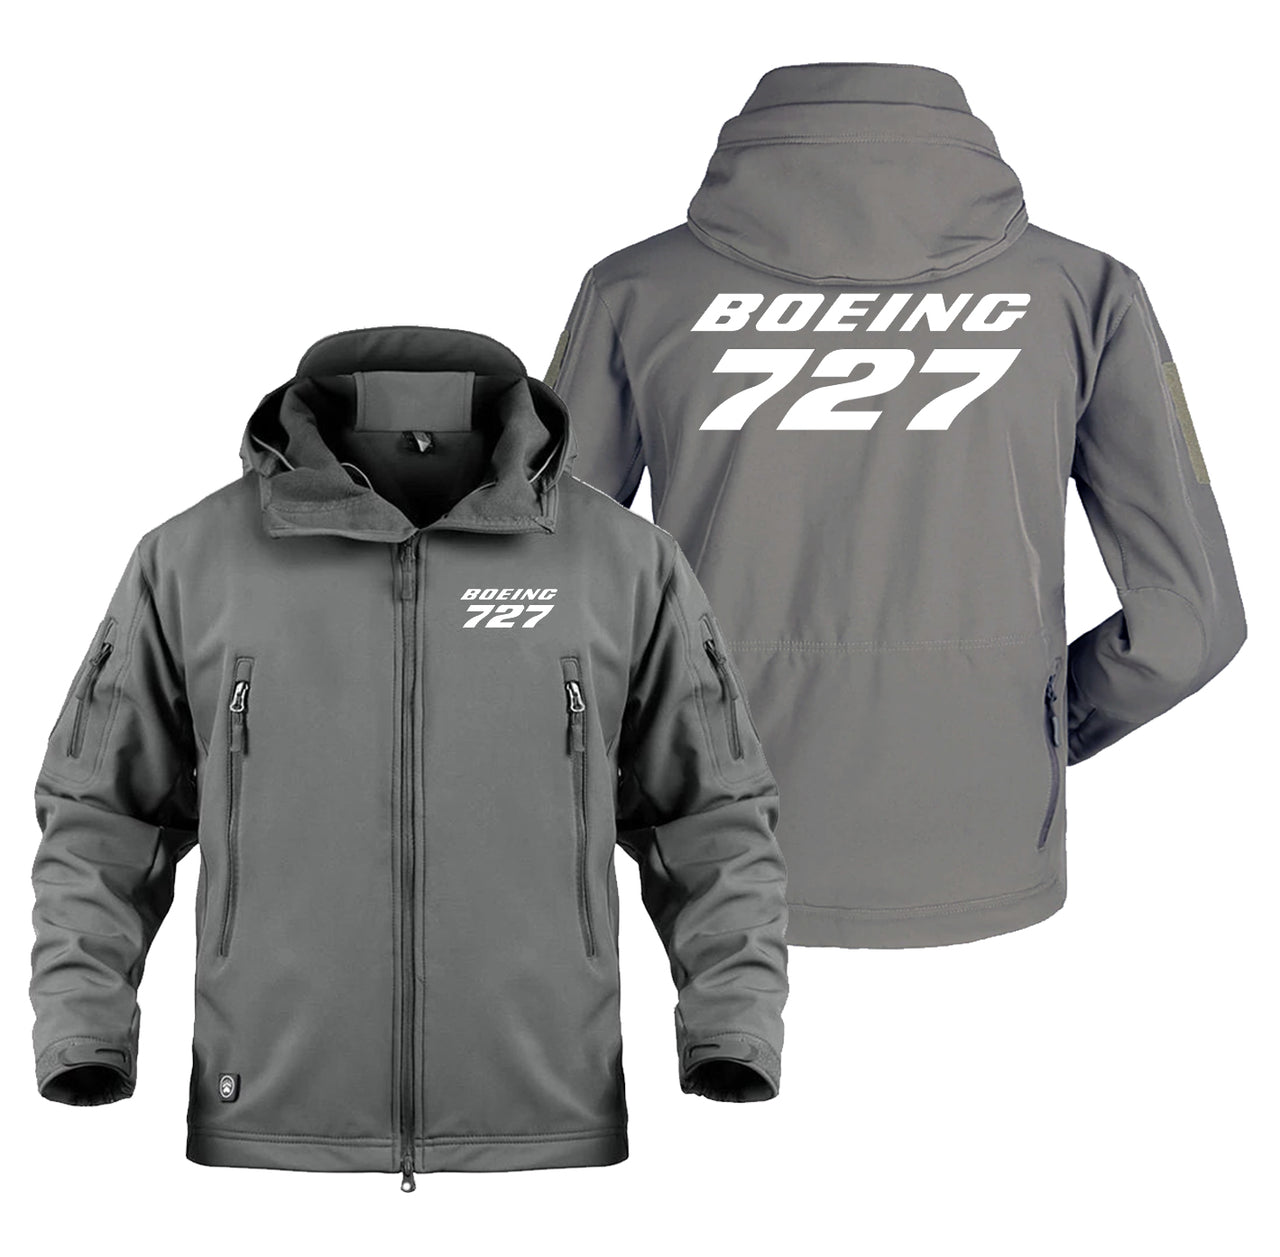 Boeing 727 & Text Designed Military Jackets (Customizable)